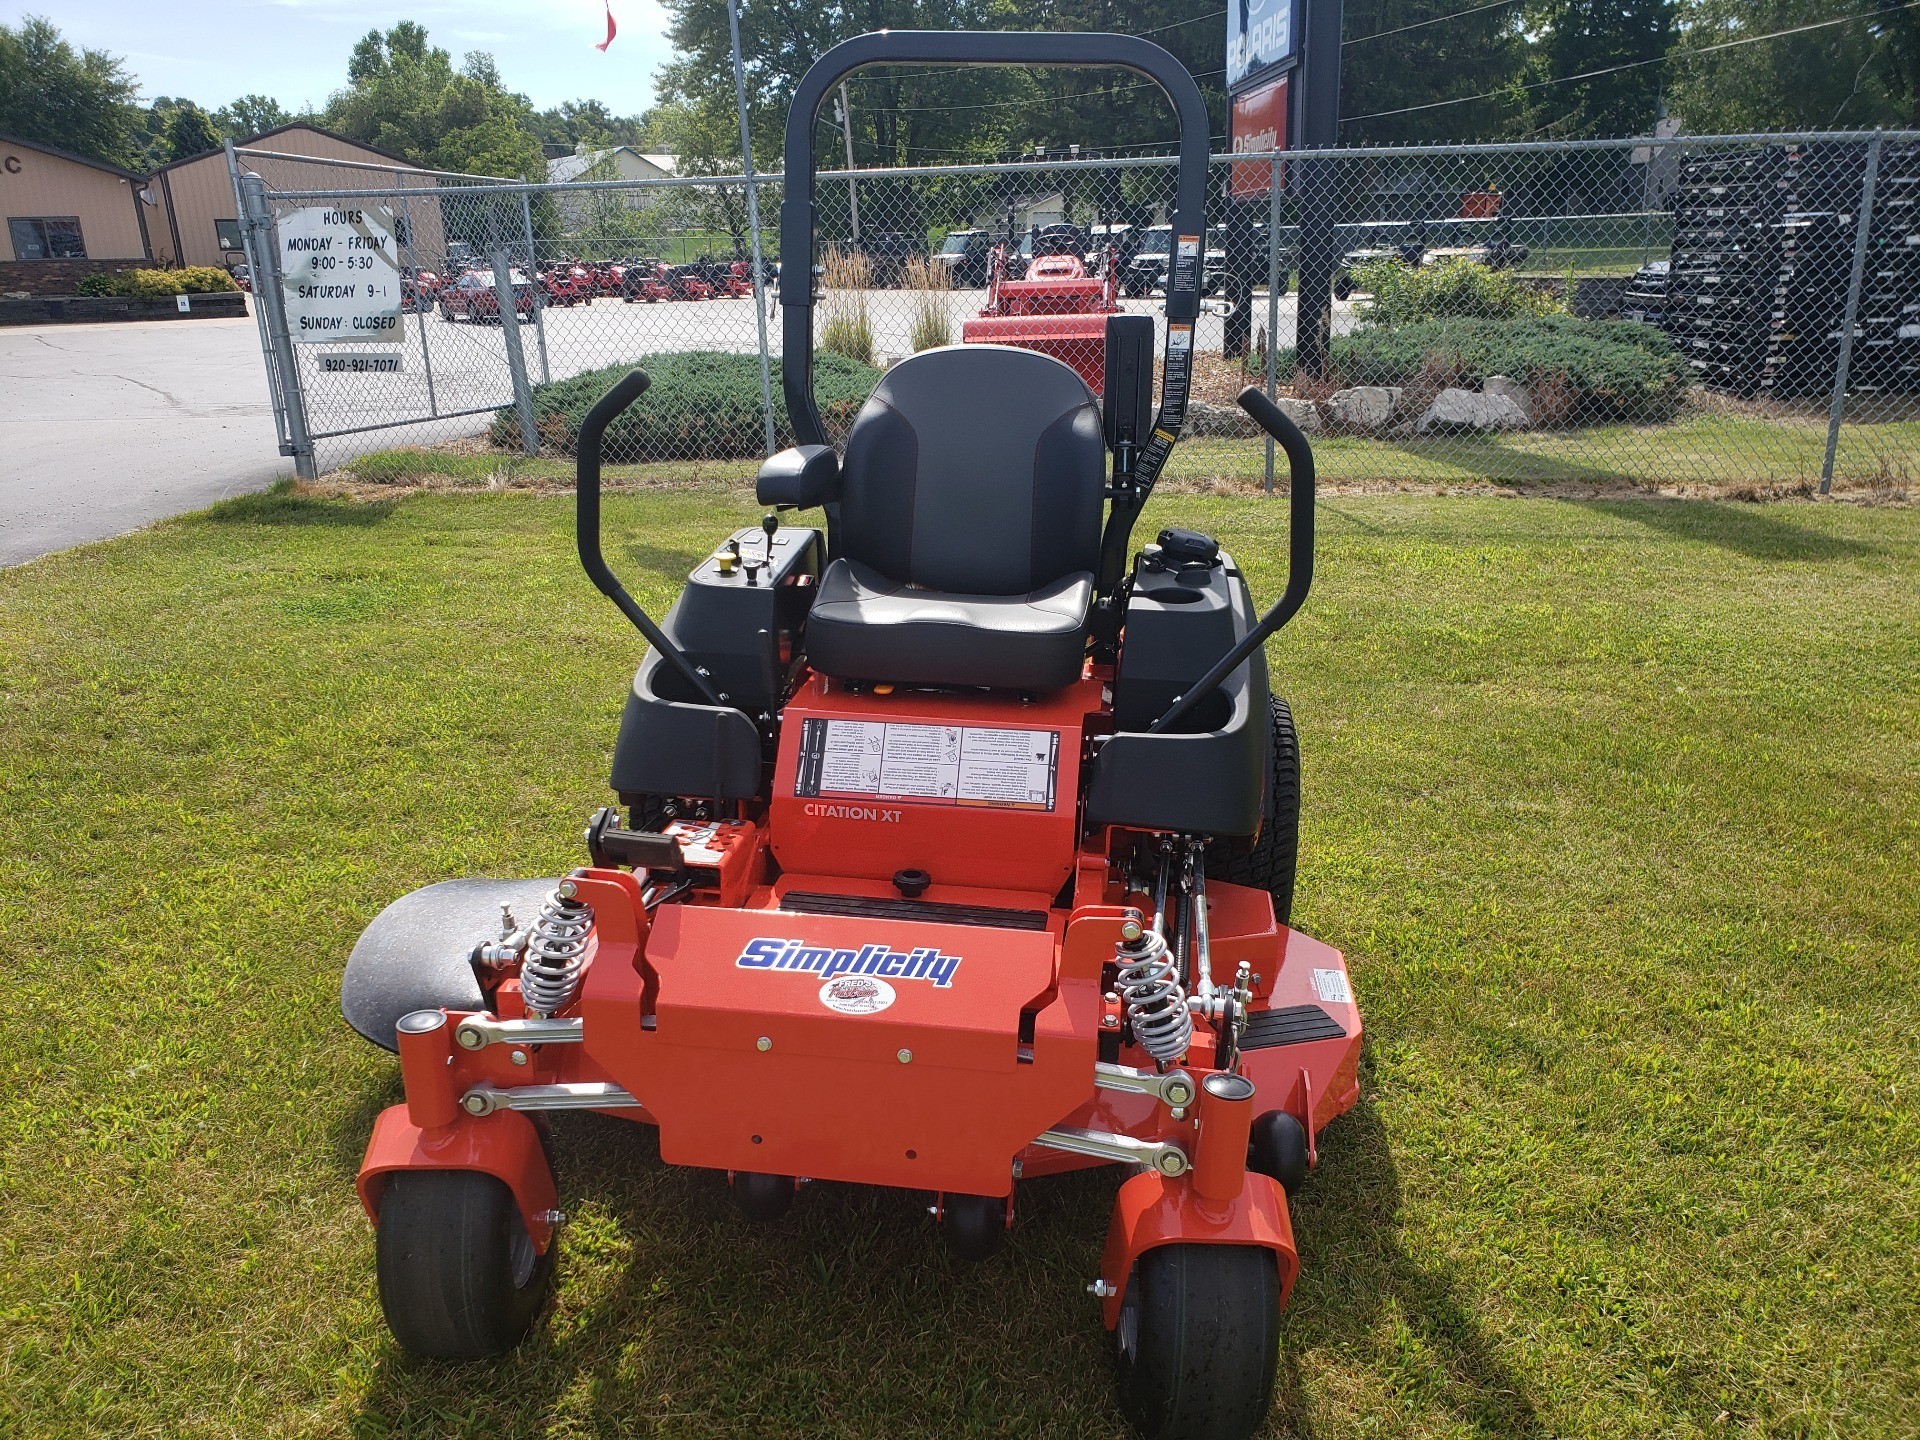 New Simplicity Citation Xt 27 61 Lawn Mowers In Fond Du Lac Wi Stock Number Sim